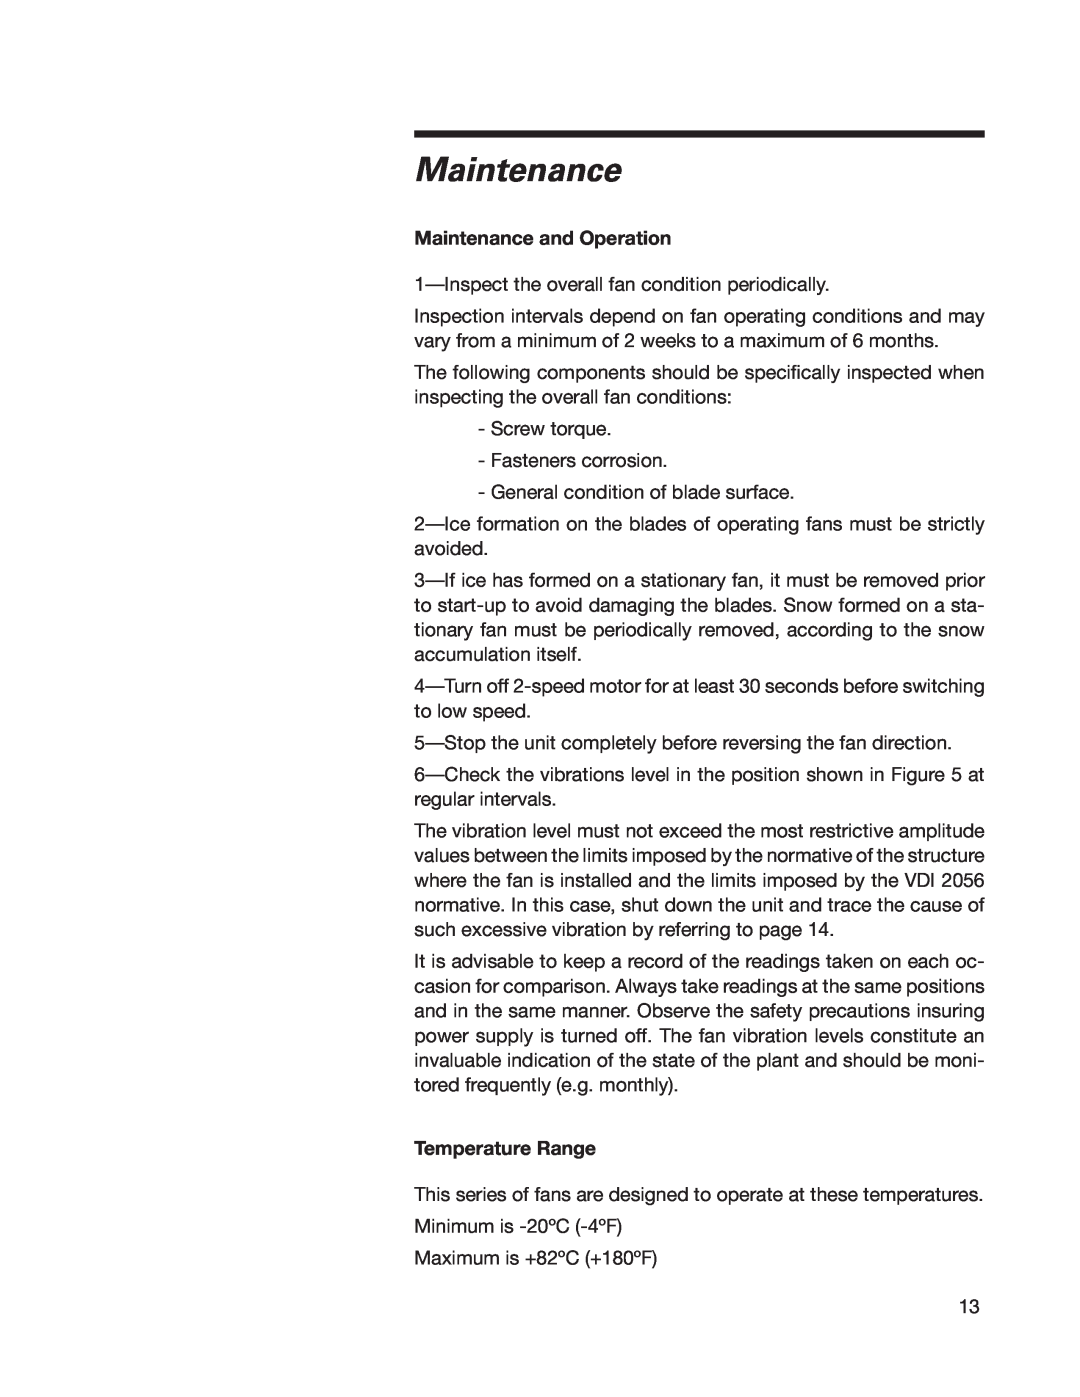 SPX Cooling Technologies 07-1126 user manual Maintenance and Operation, Temperature Range 